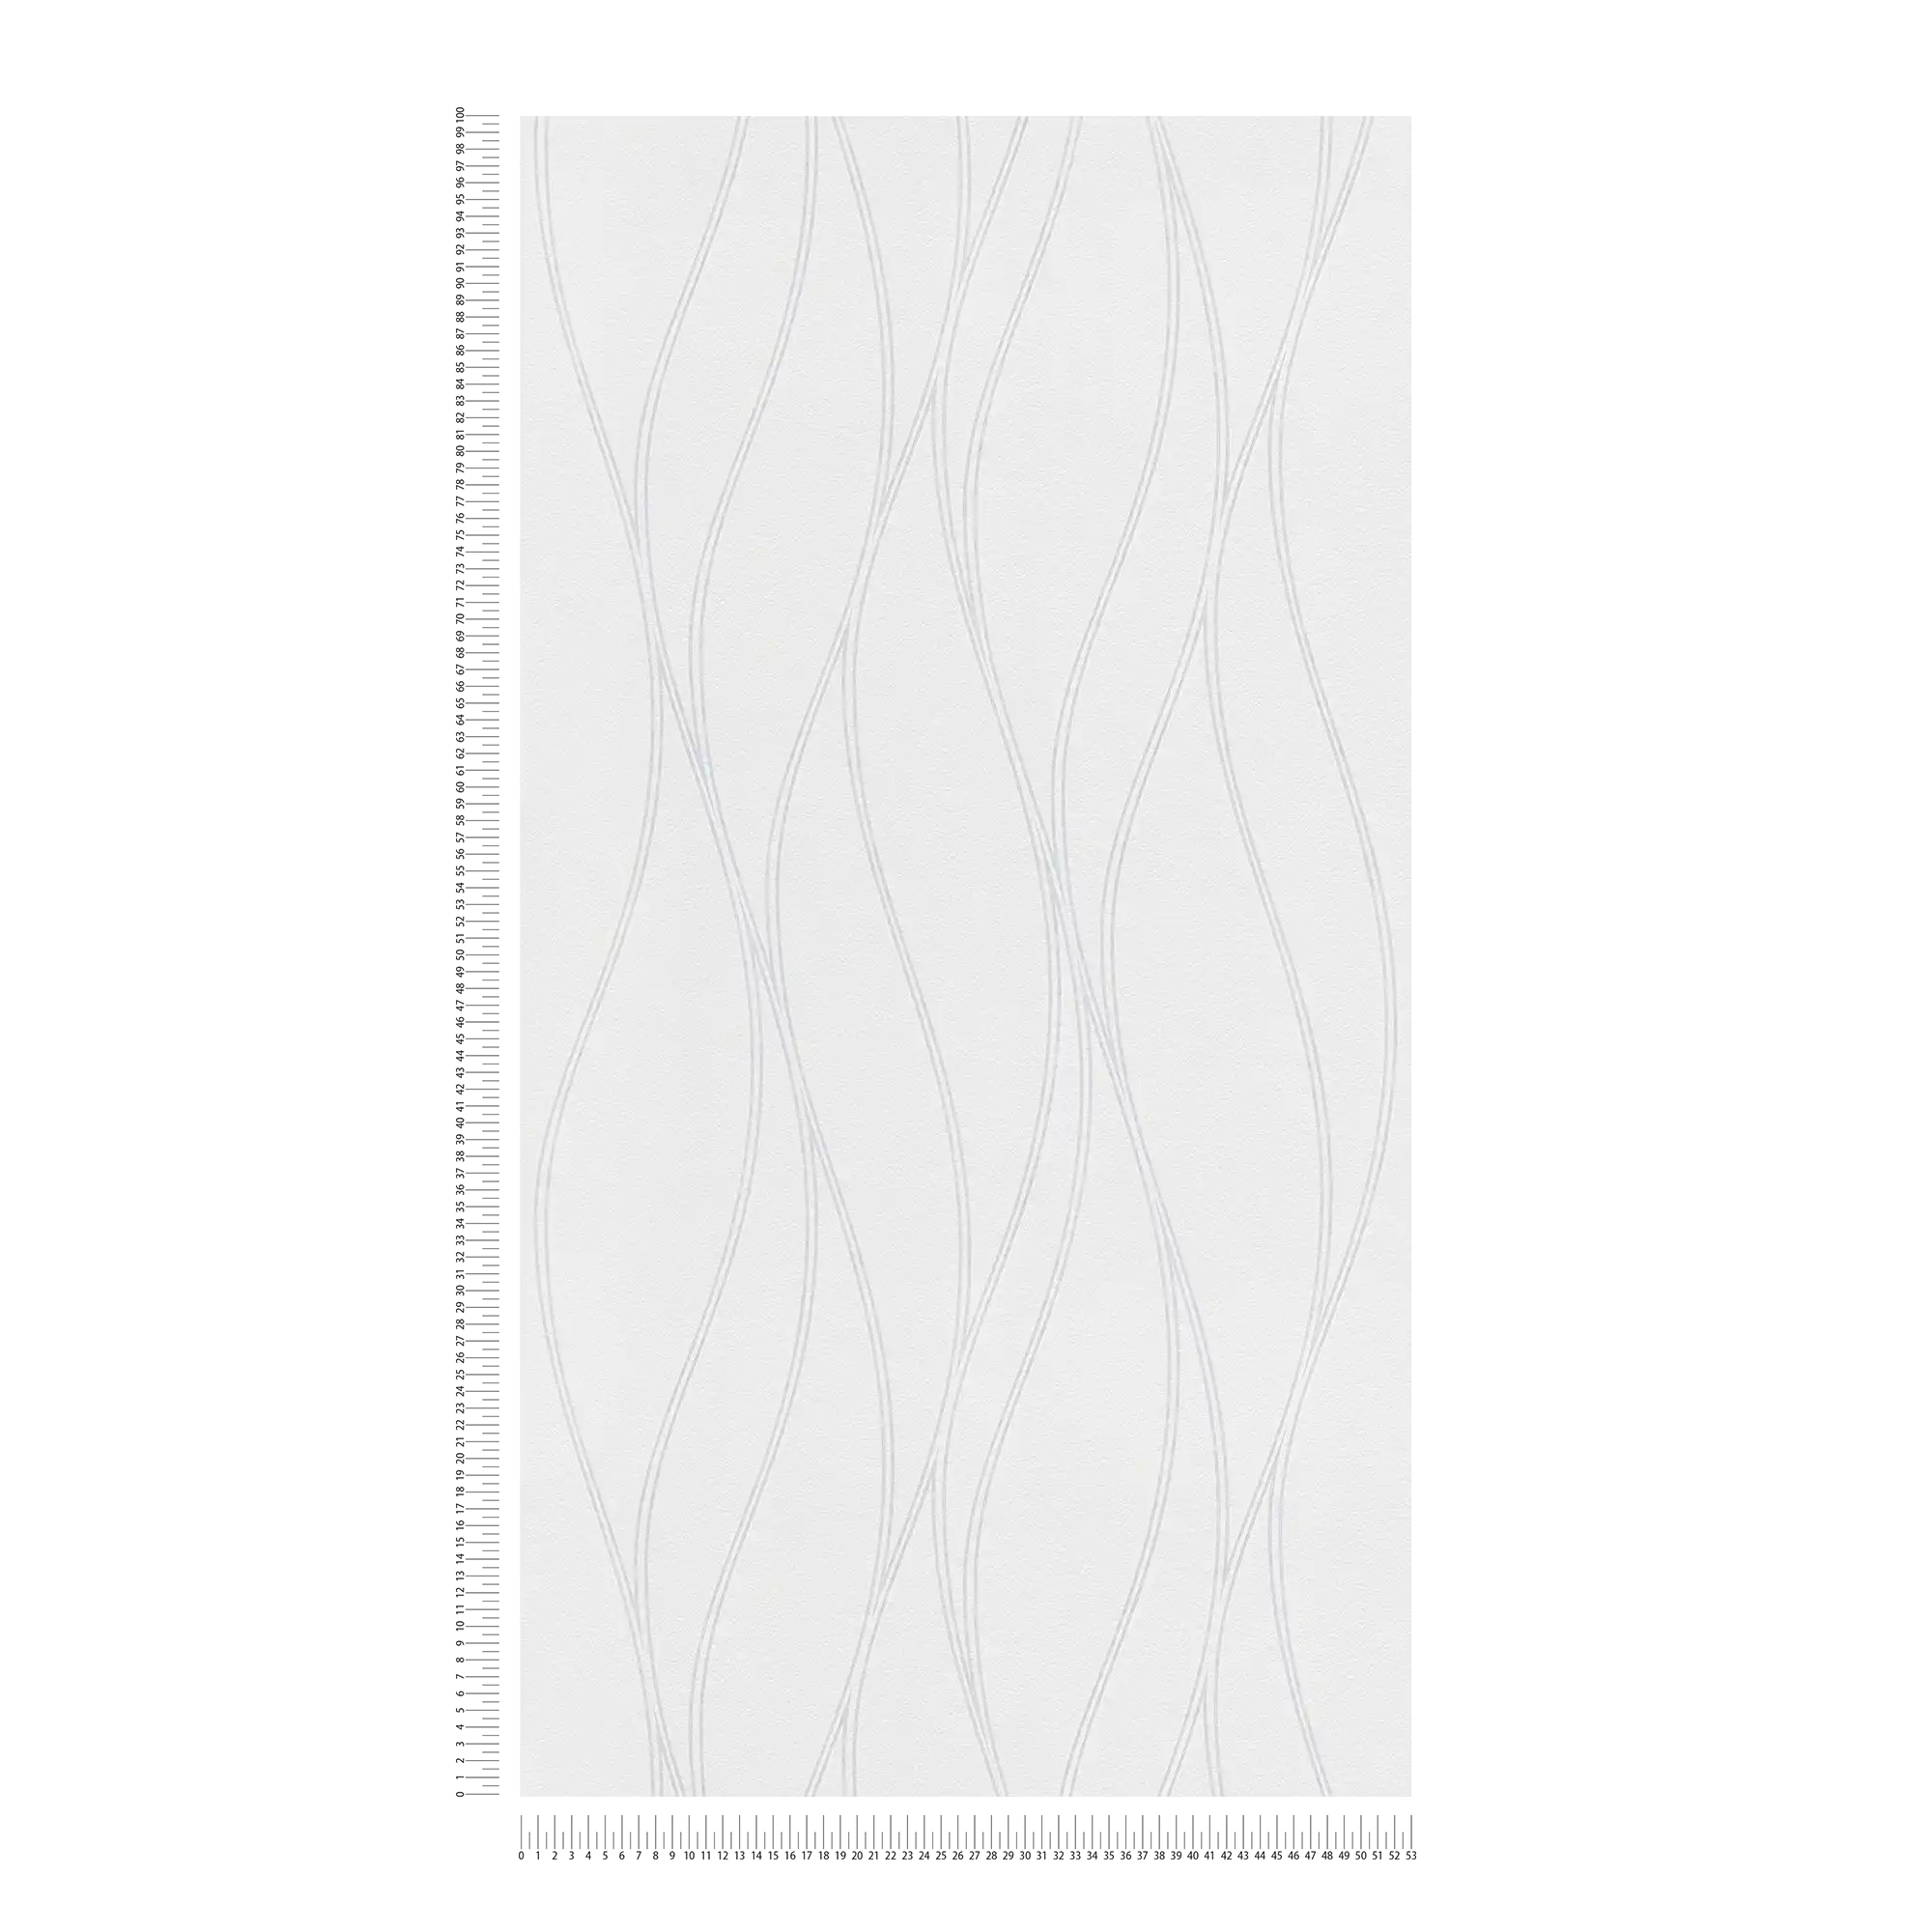             Paintable wallpaper with curved line design
        